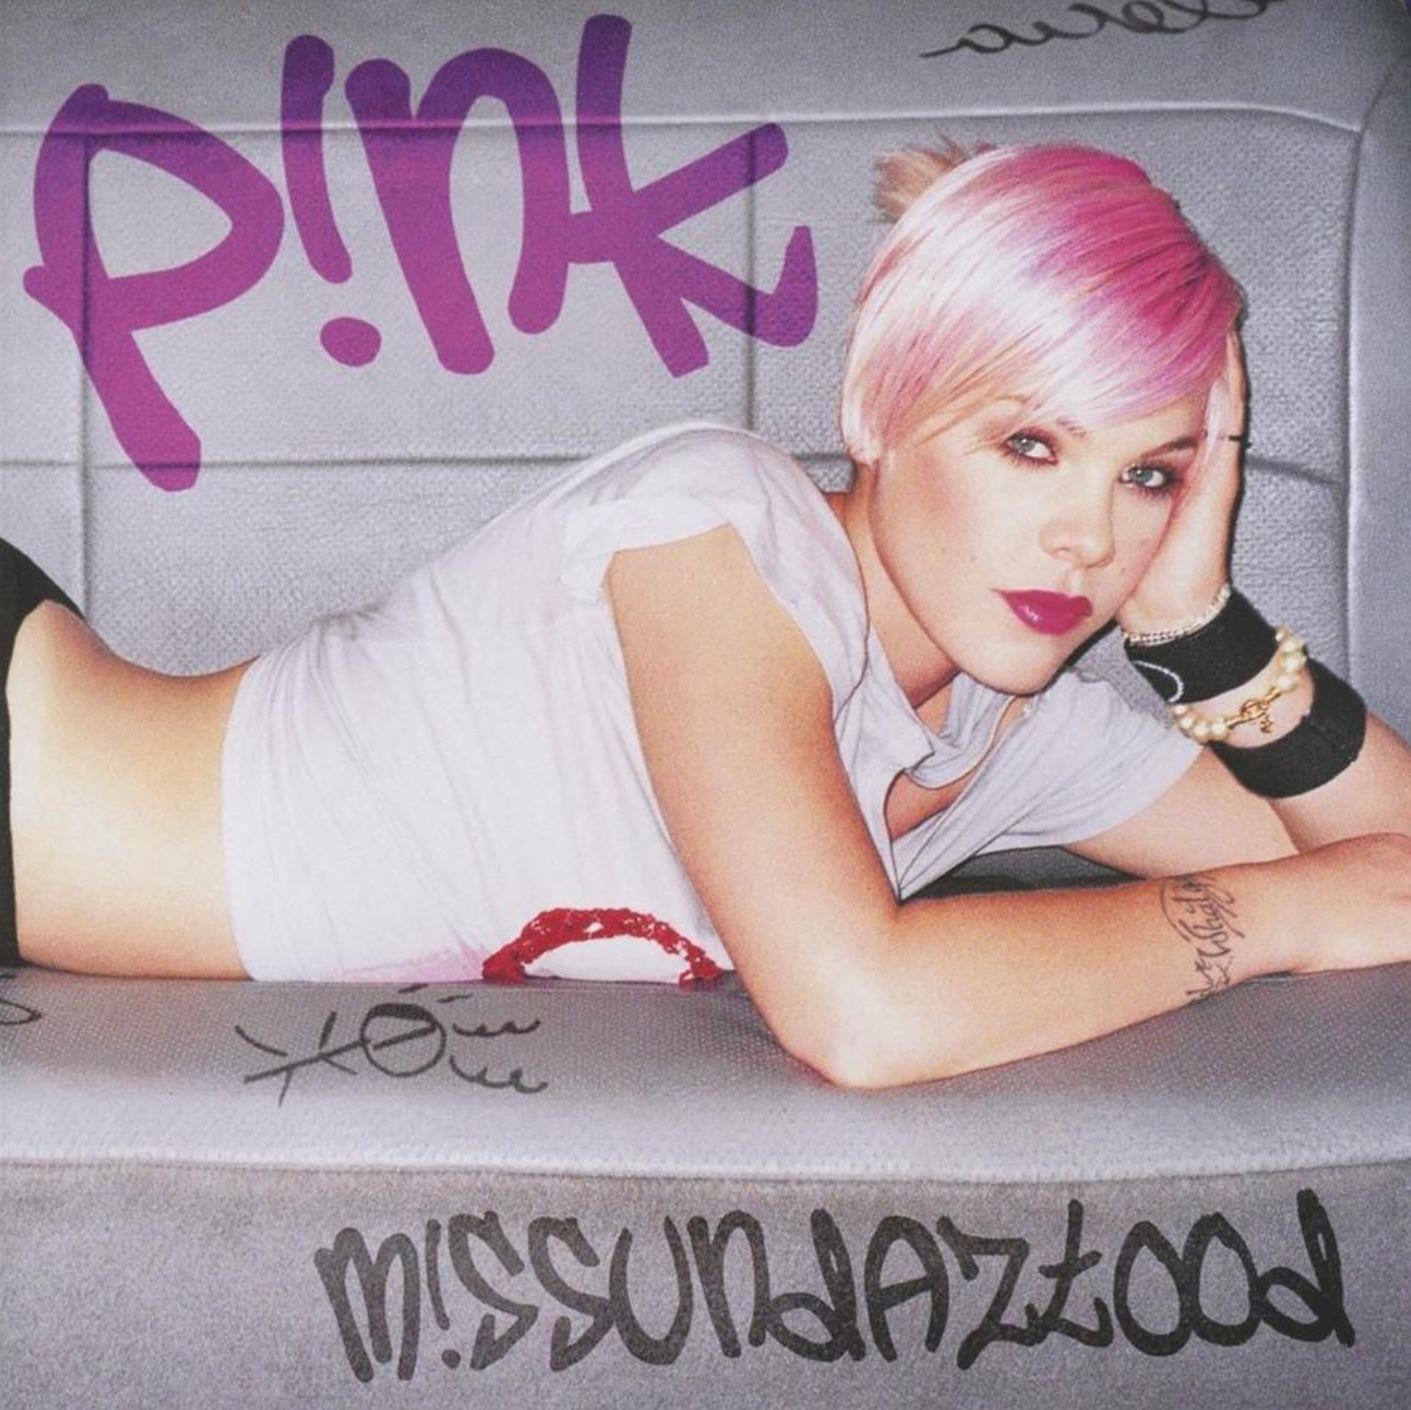 P!nk Throwbacks on Instagram: “Throwback to Pink during her